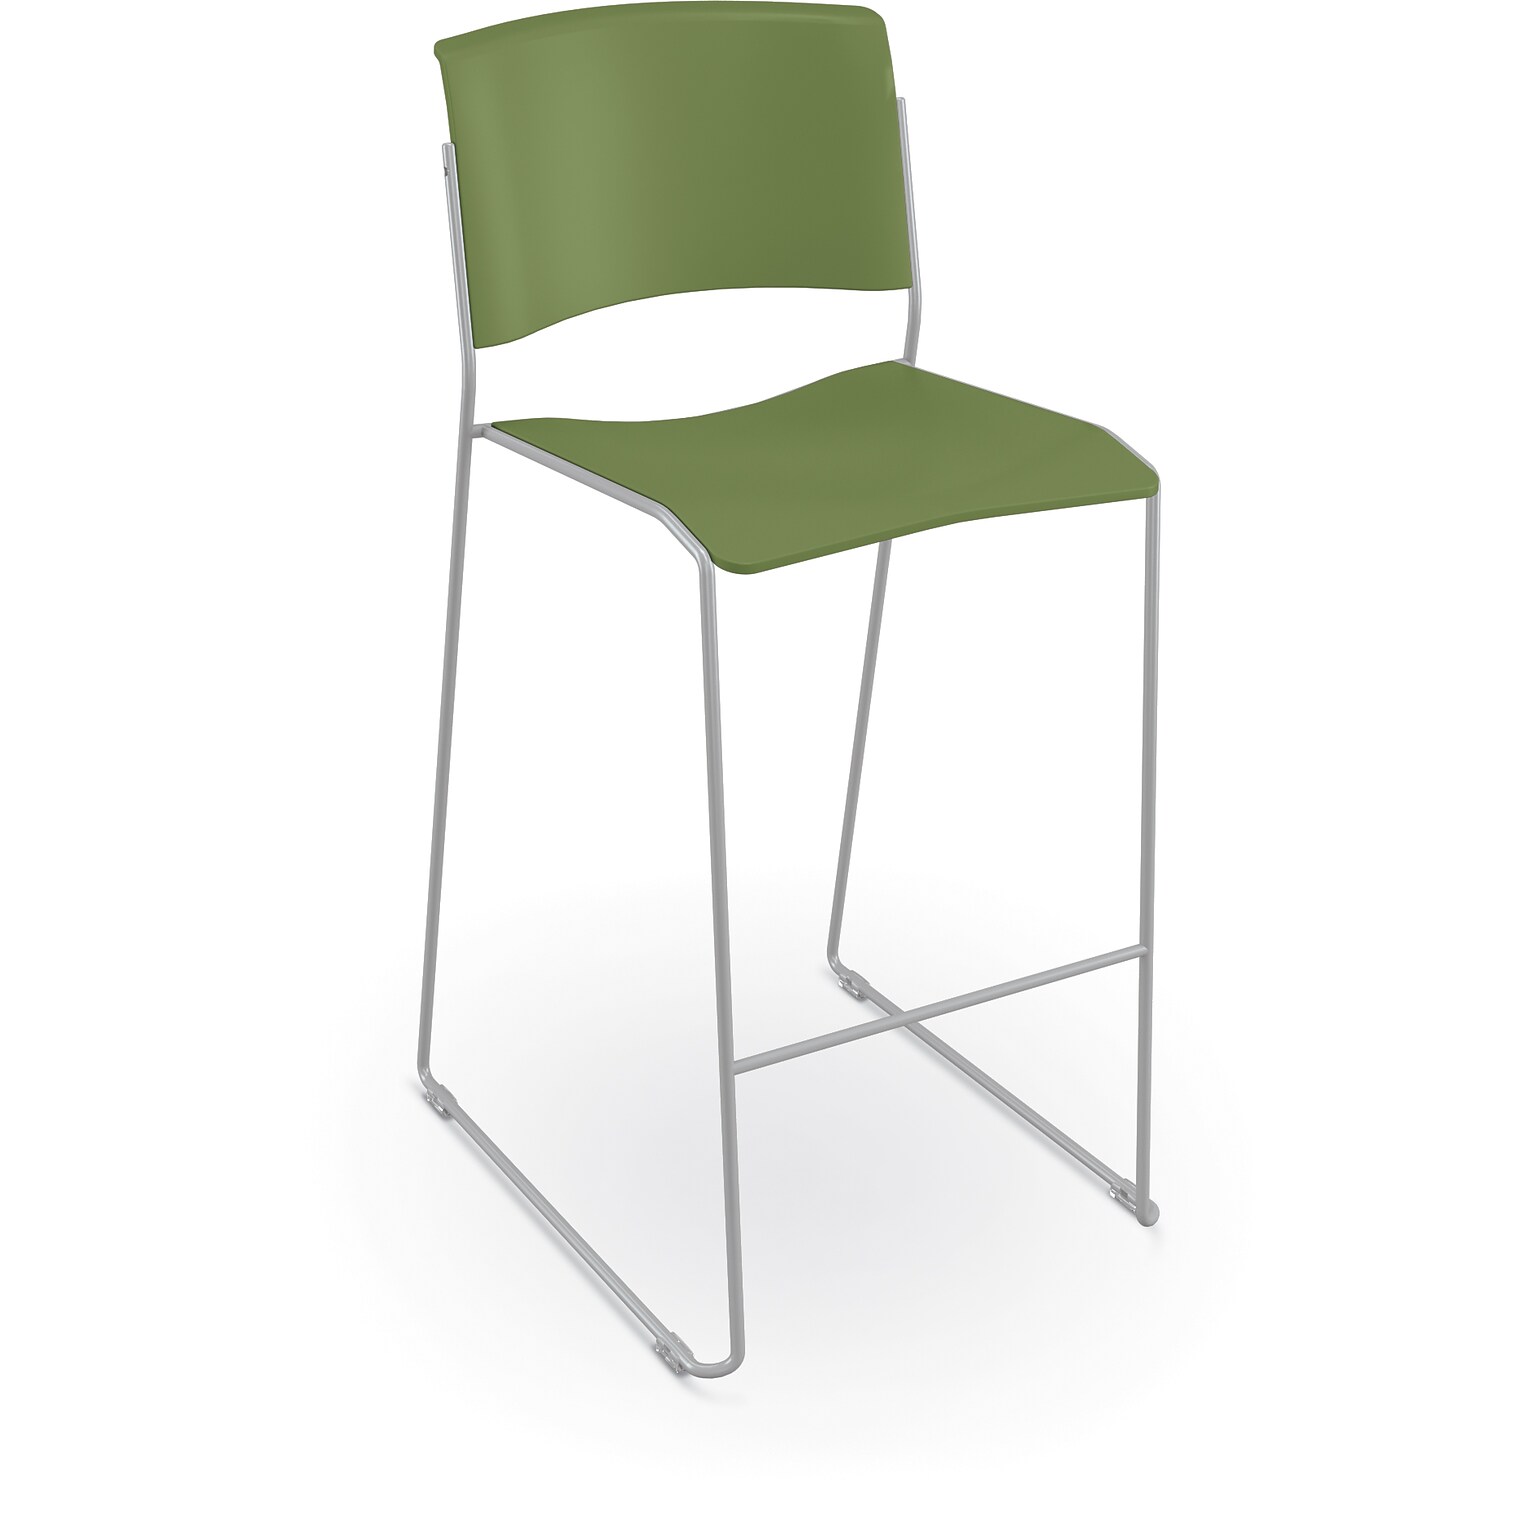 MooreCo Akt Stacking Student Stool, Moss (56578-MOSS)